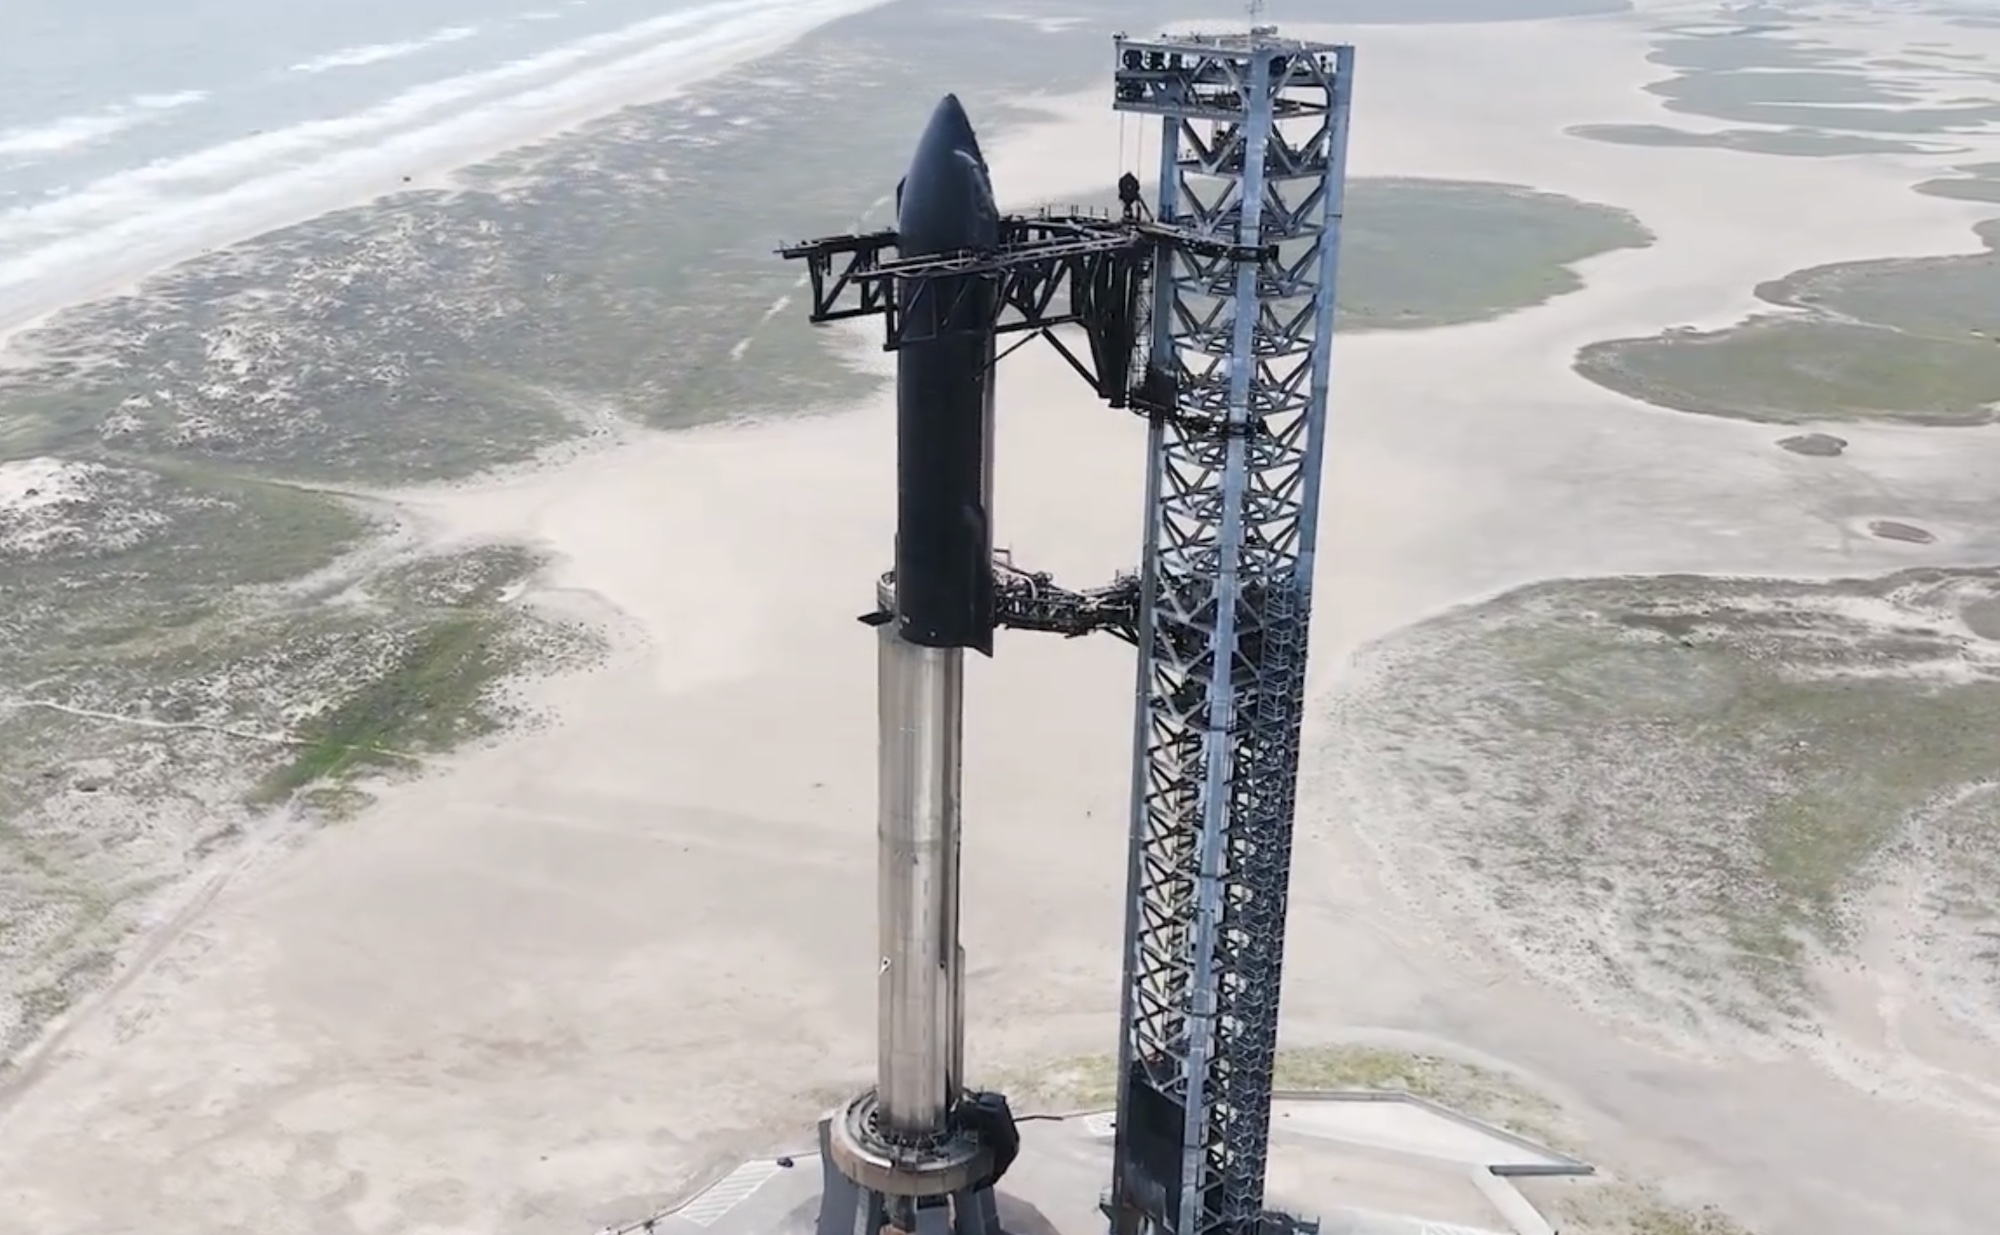 SpaceX's Starship rocket being stacked for its fourth test flight.